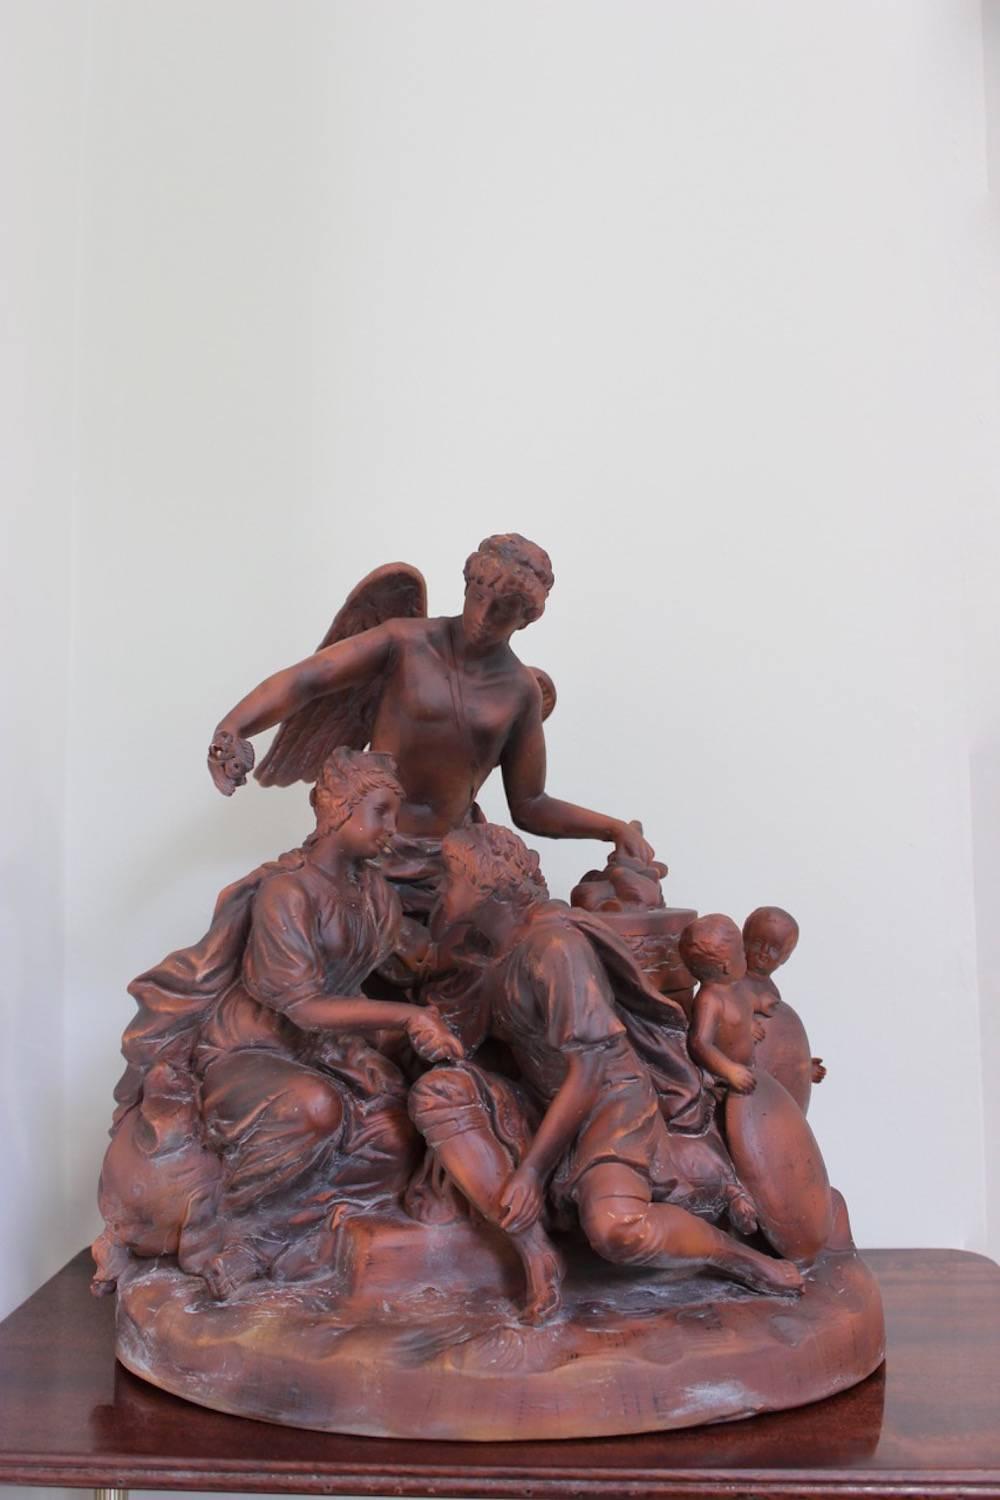 A well executed Austrian, late 19th or early 20th century patinated terracotta allegorical group by the Goldscheider manufactory.